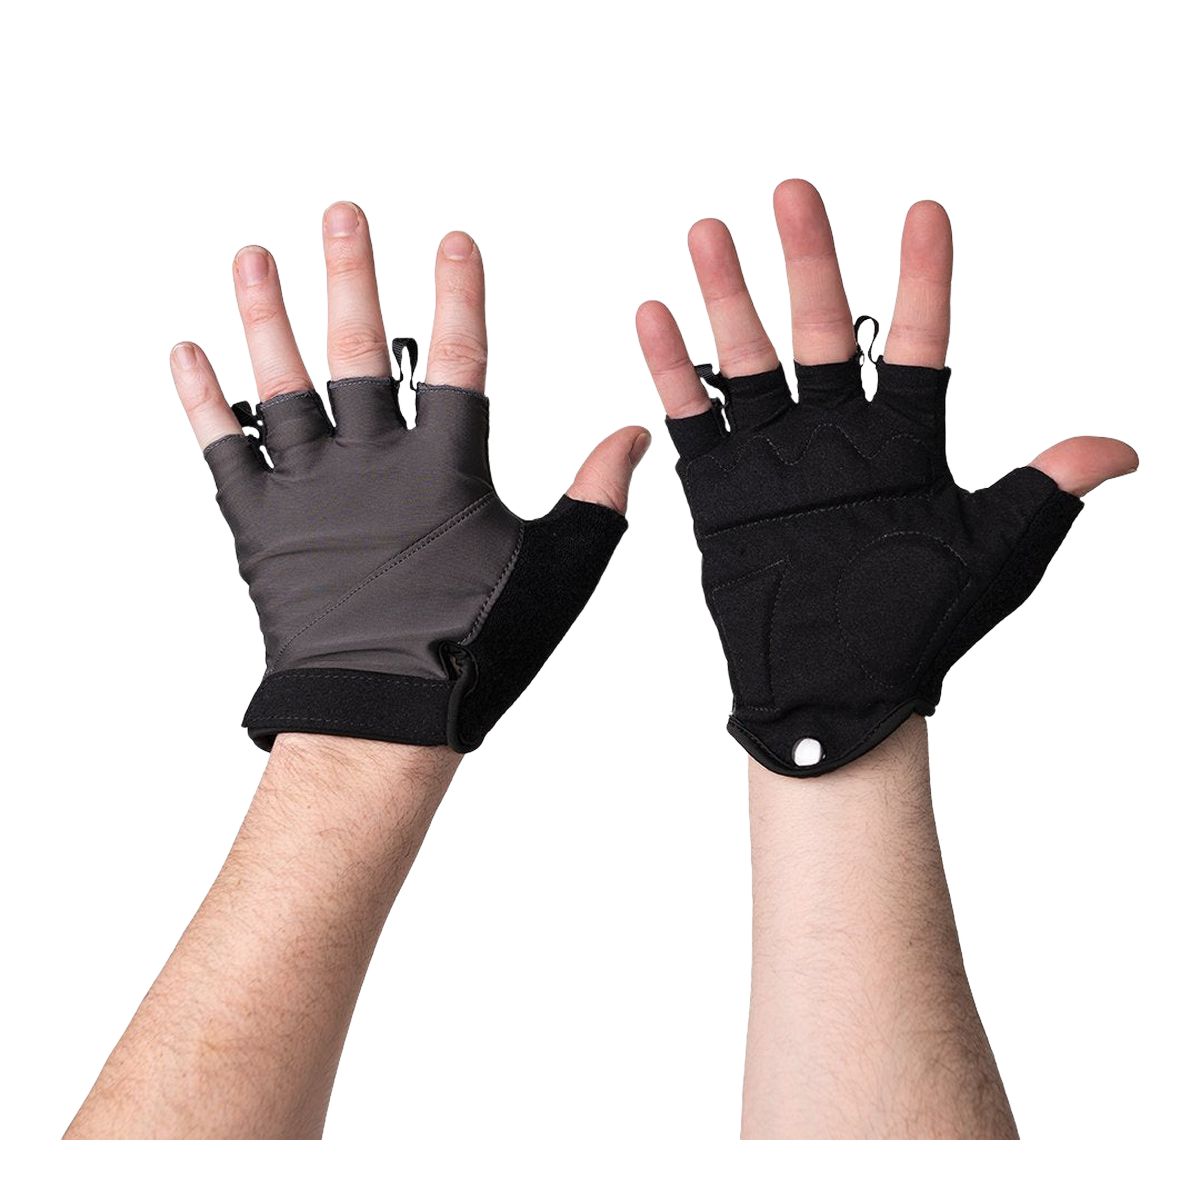 https://media-www.atmosphere.ca/product/div-01-hardgoods/dpt-14-watersports/sdpt-36-suits/333737983/l6-cascade-paddling-gloves-silver-d12fb419-80fd-4ead-b16e-53c188127de4-jpgrendition.jpg?imdensity=1&imwidth=1244&impolicy=mZoom